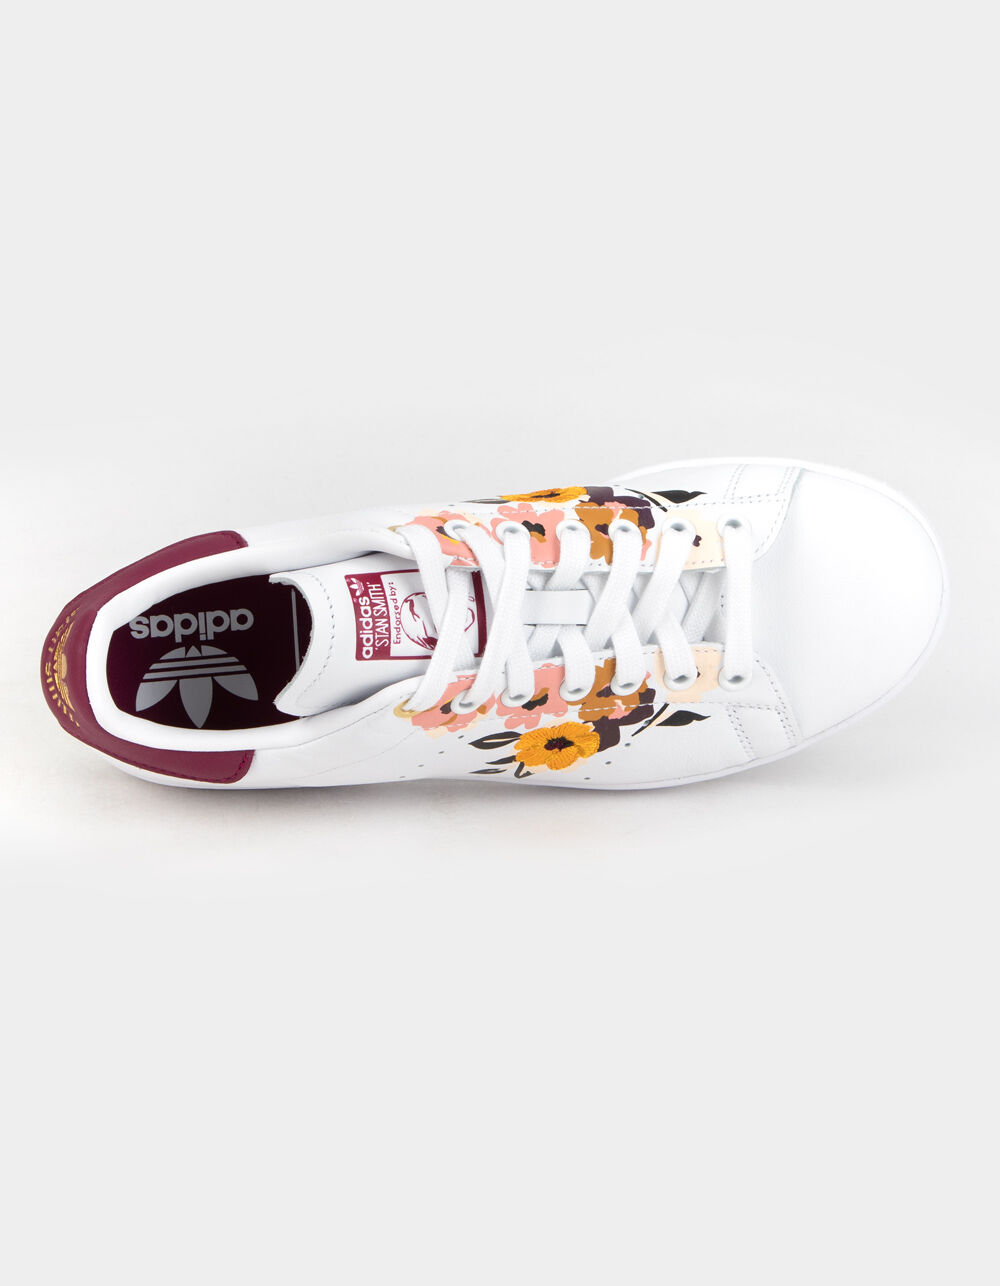 🔥 Adidas Originals STAN SMITH Women's Sneakers Lifestyle FLORAL 🌺 US 8